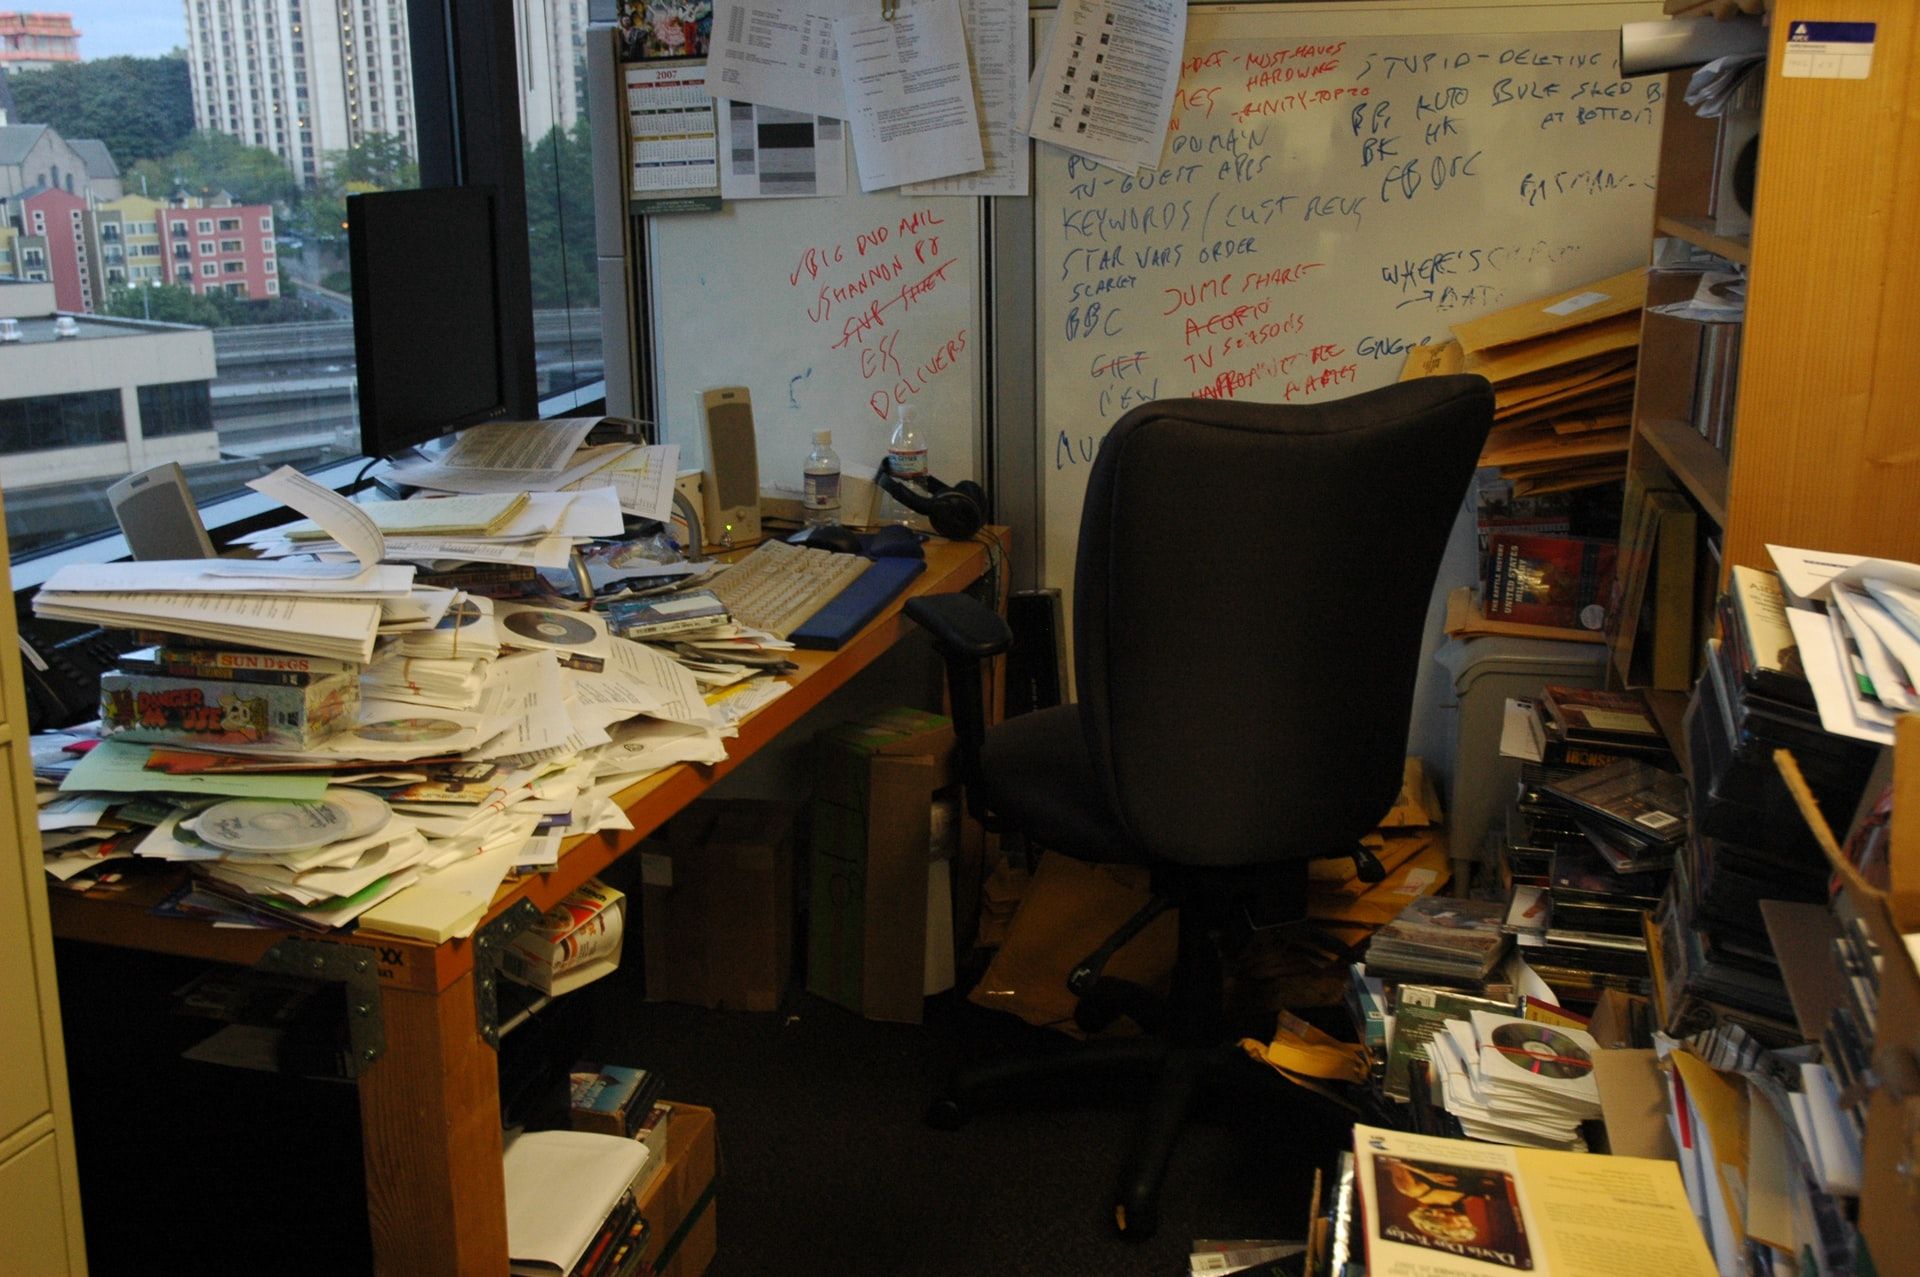 A messy office with lots of paper and trash